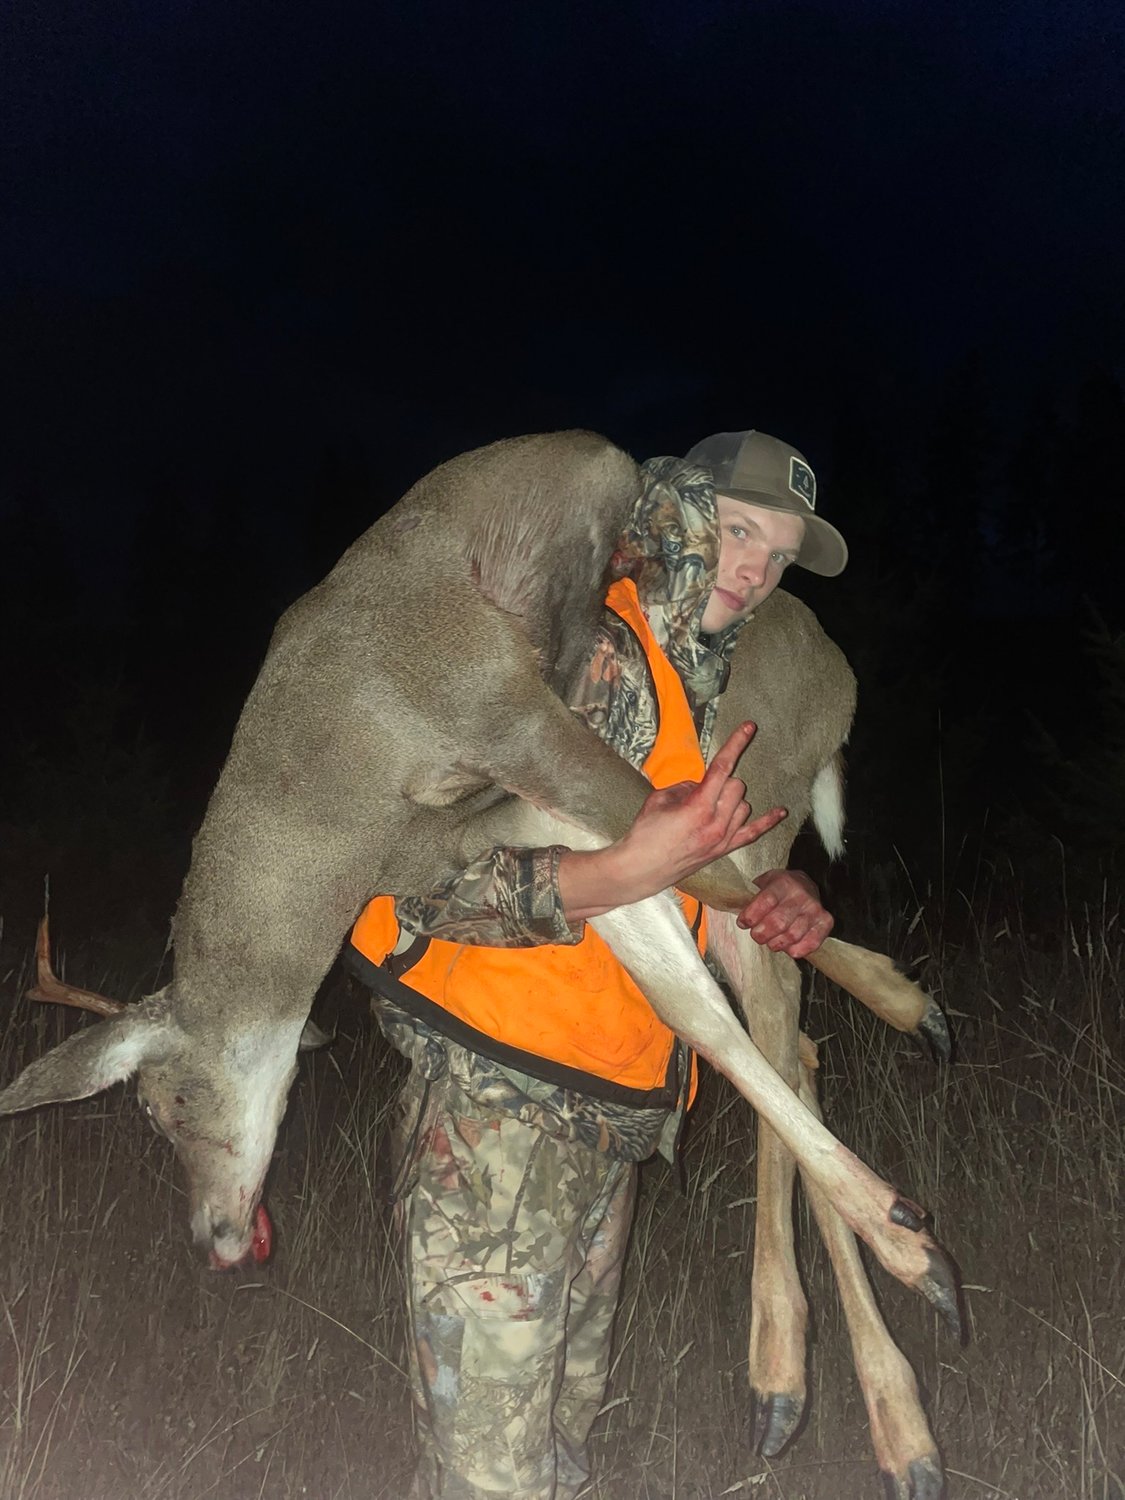 Evan Tornow harvested this buck around the Boistfort area on Oct. 26. This photo was submitted by Katelynn Guenther.